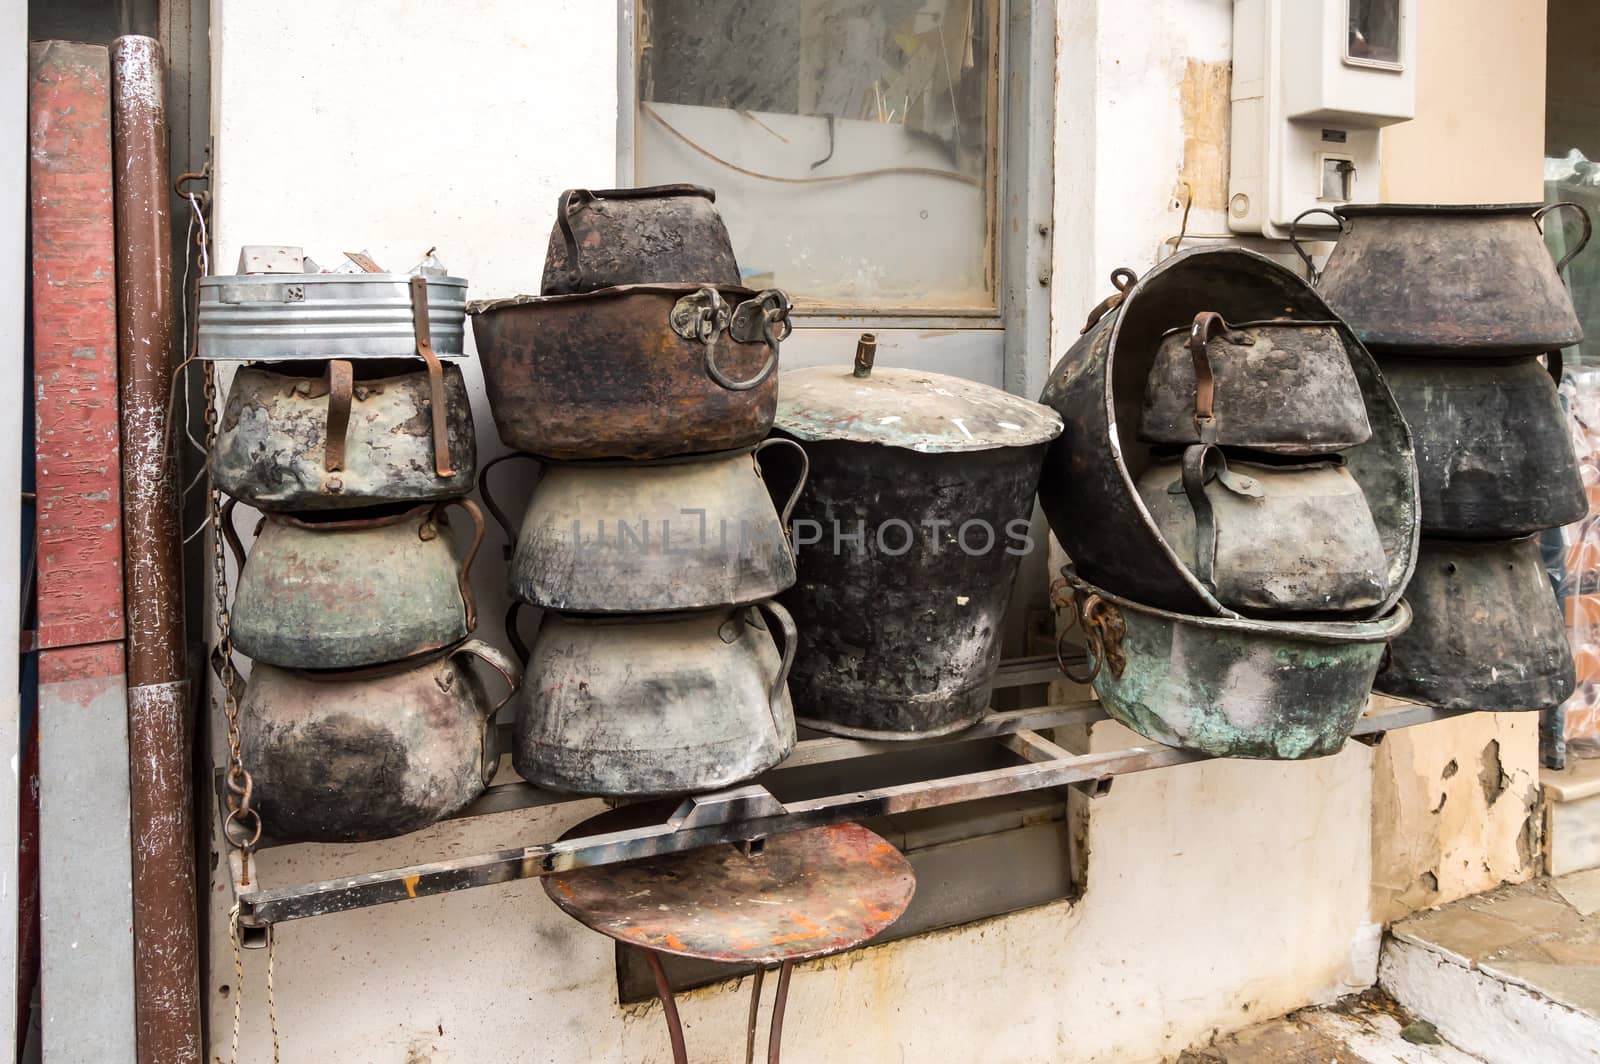 Several old cauldrons in heap  by Philou1000